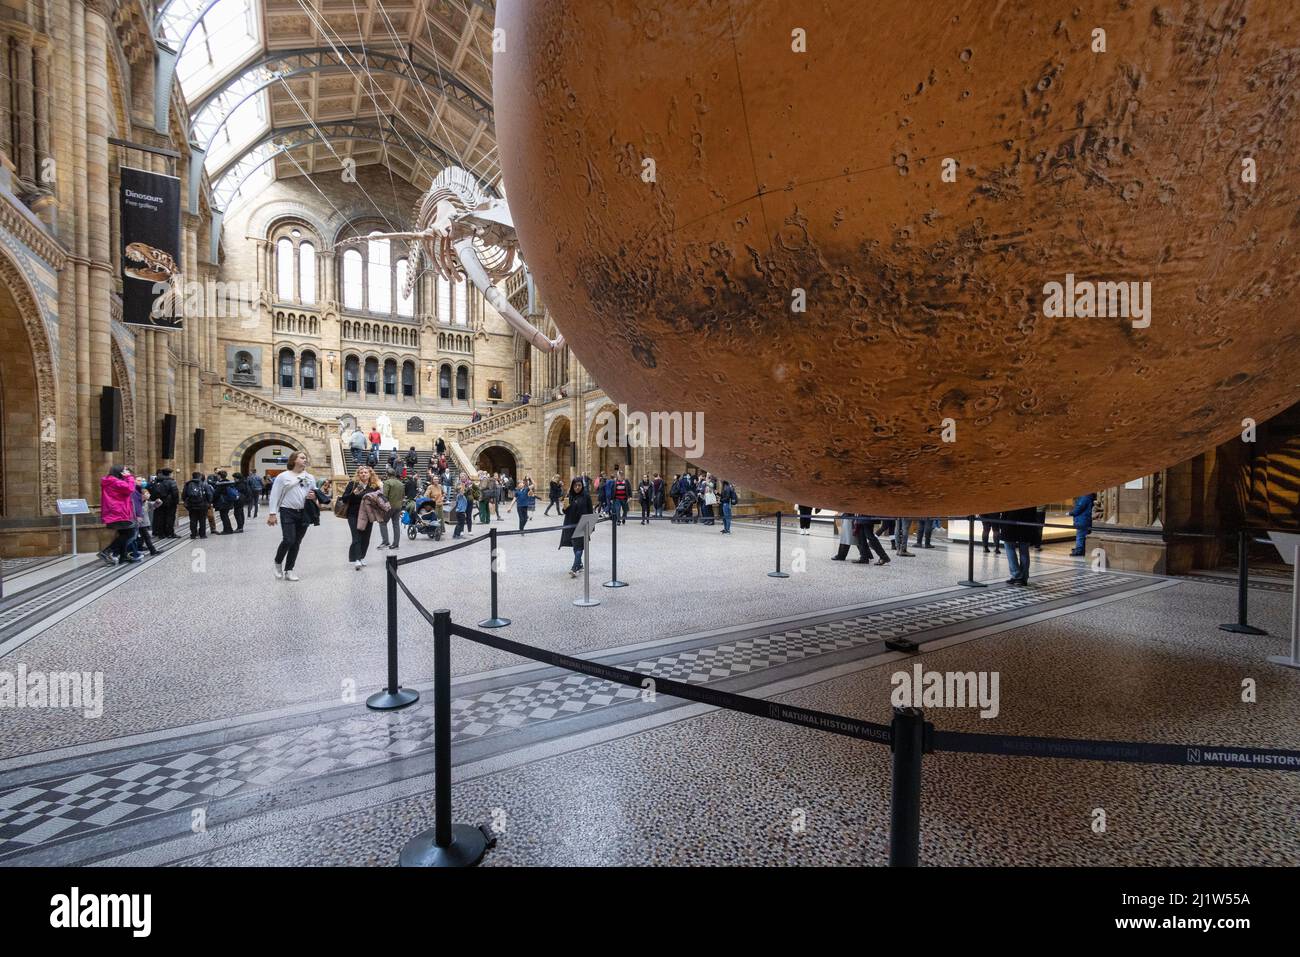 Luke Jerram Mars; people looking at the Art Model of Mars by Luke Jerram in the main hall of the Natural History Museum, London UK Stock Photo